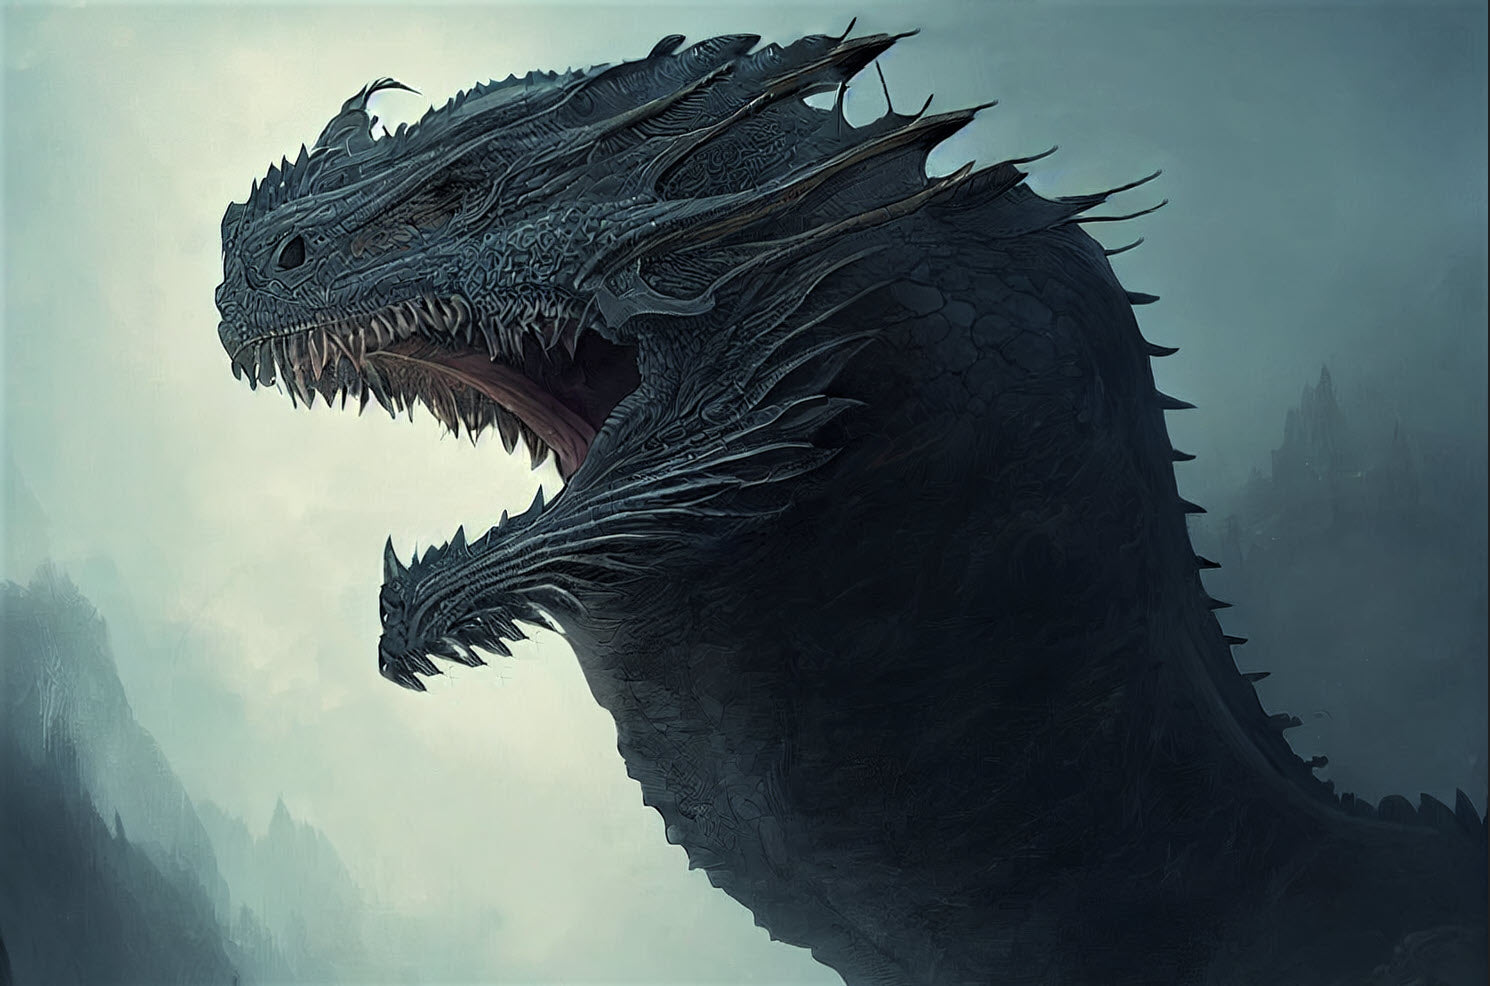 A Brief History of Dragons in Mythology